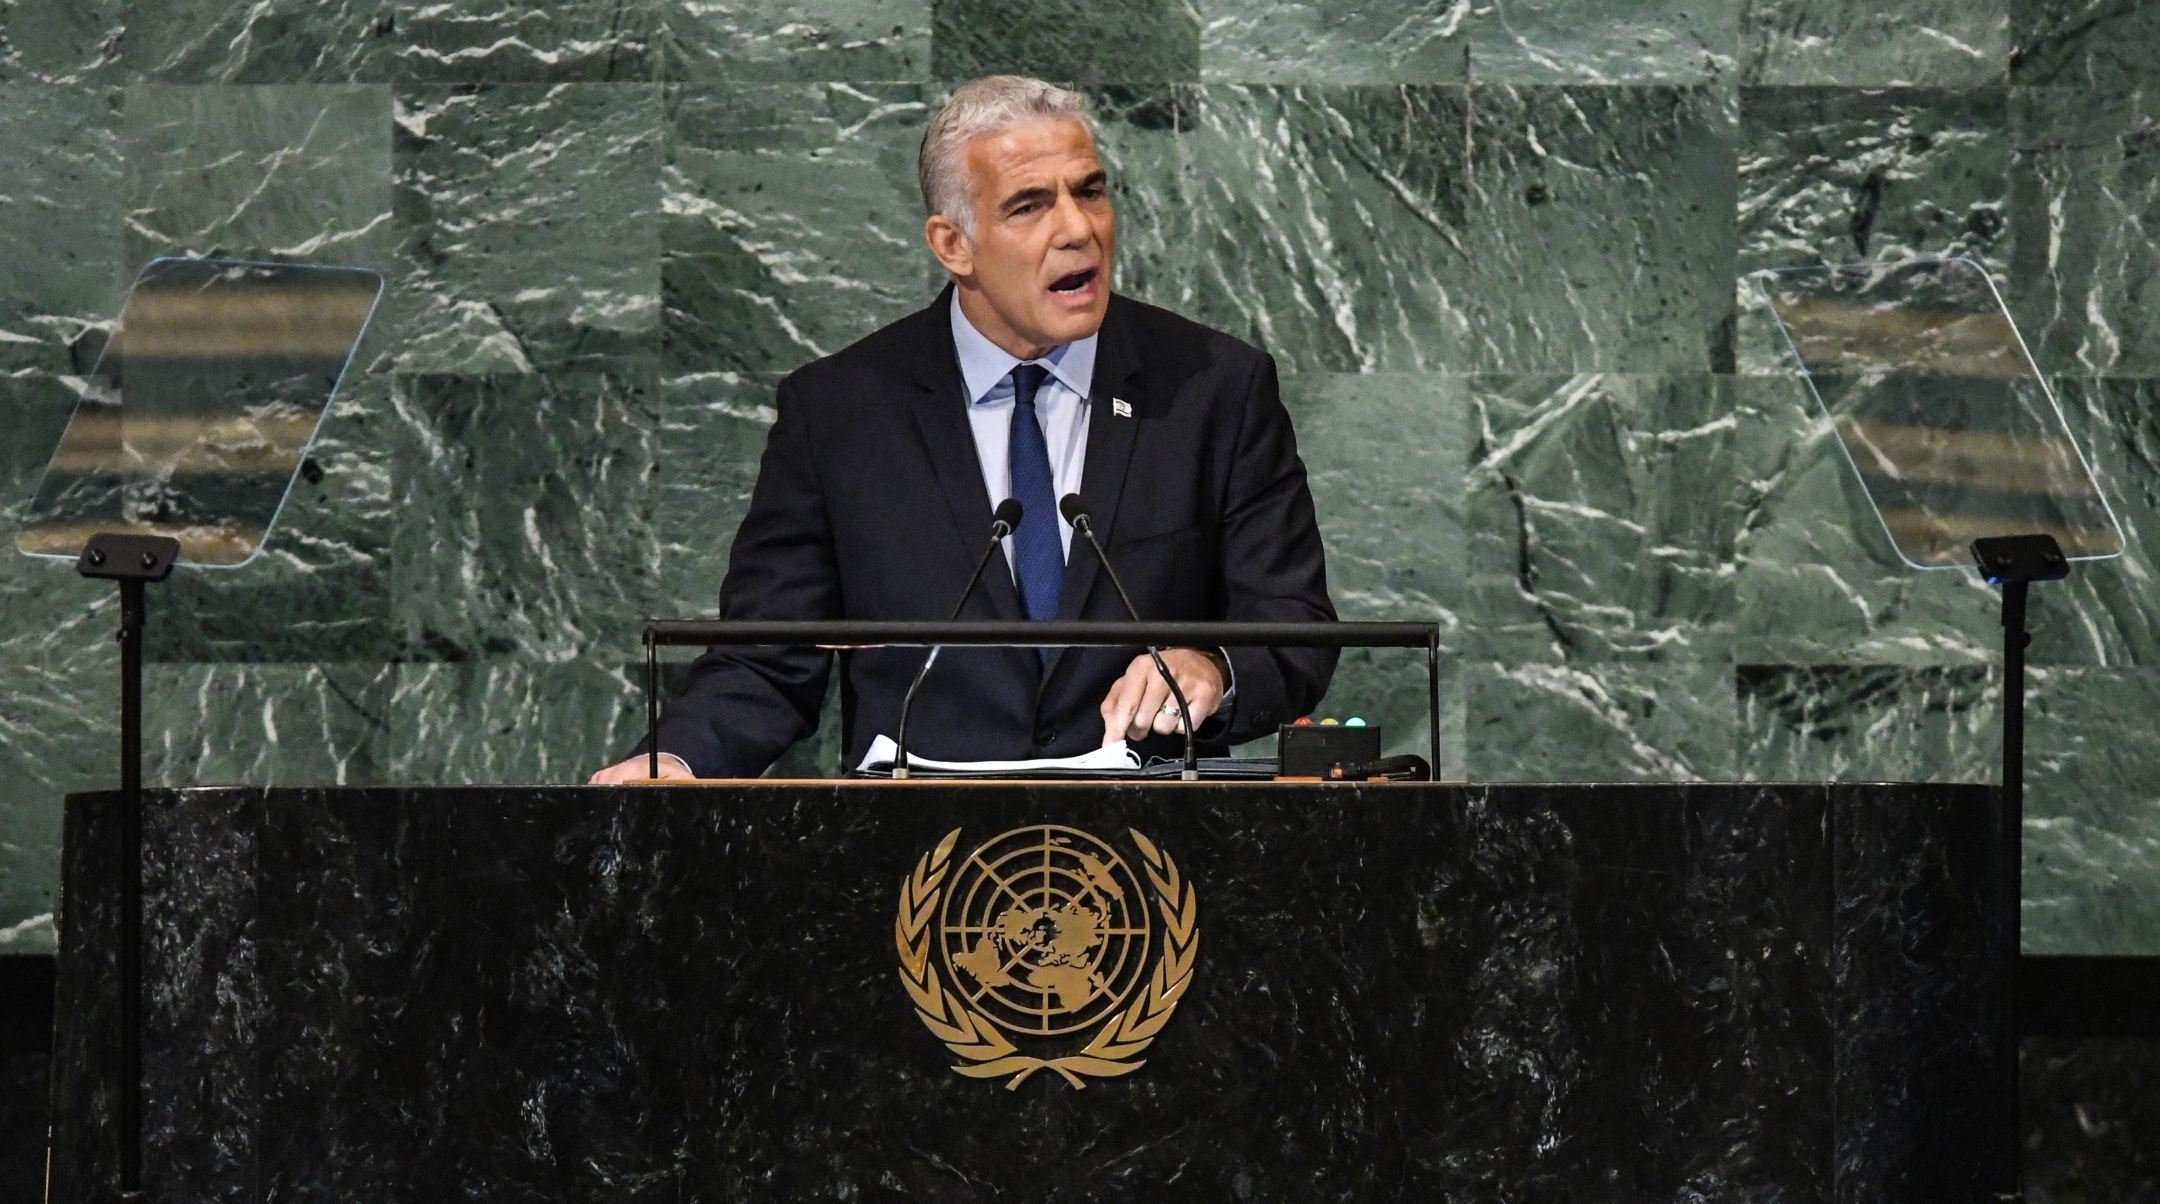 Israeli Prime Minister Yair Lapid gives a speech during the 77th session of the United Nations General Assembly at U.N. headquarters, Sept. 22, 2022. (Anna Moneymaker/Getty Images)